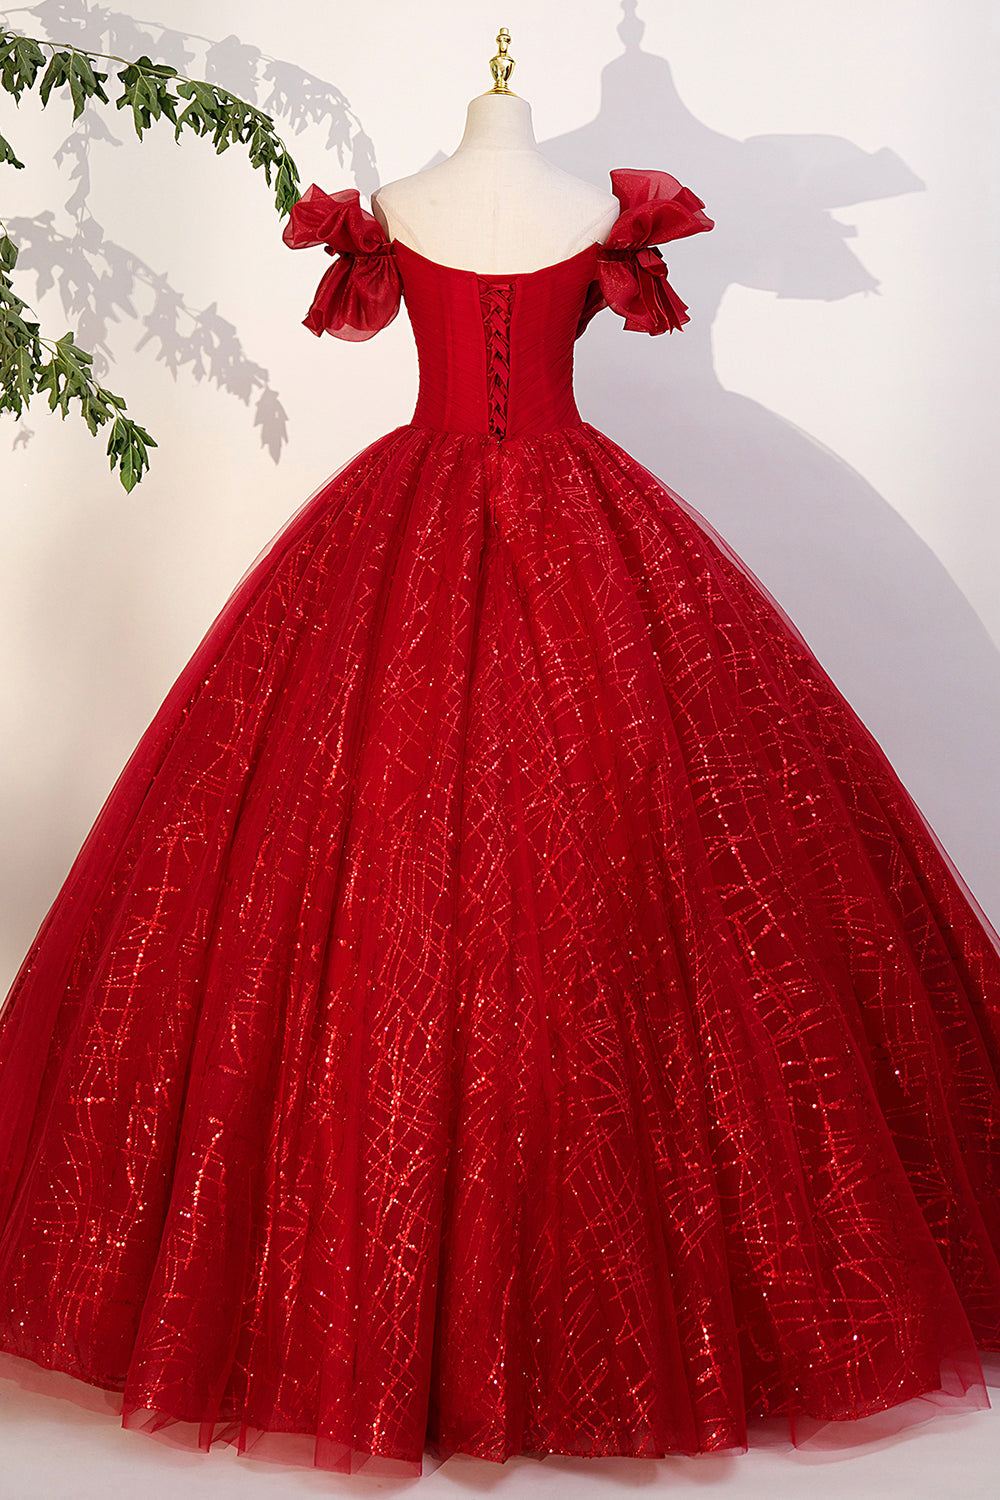 Party Dress Outfit, Red Tulle Sequins Long Formal Dress, Off the Shoulder Evening Dress